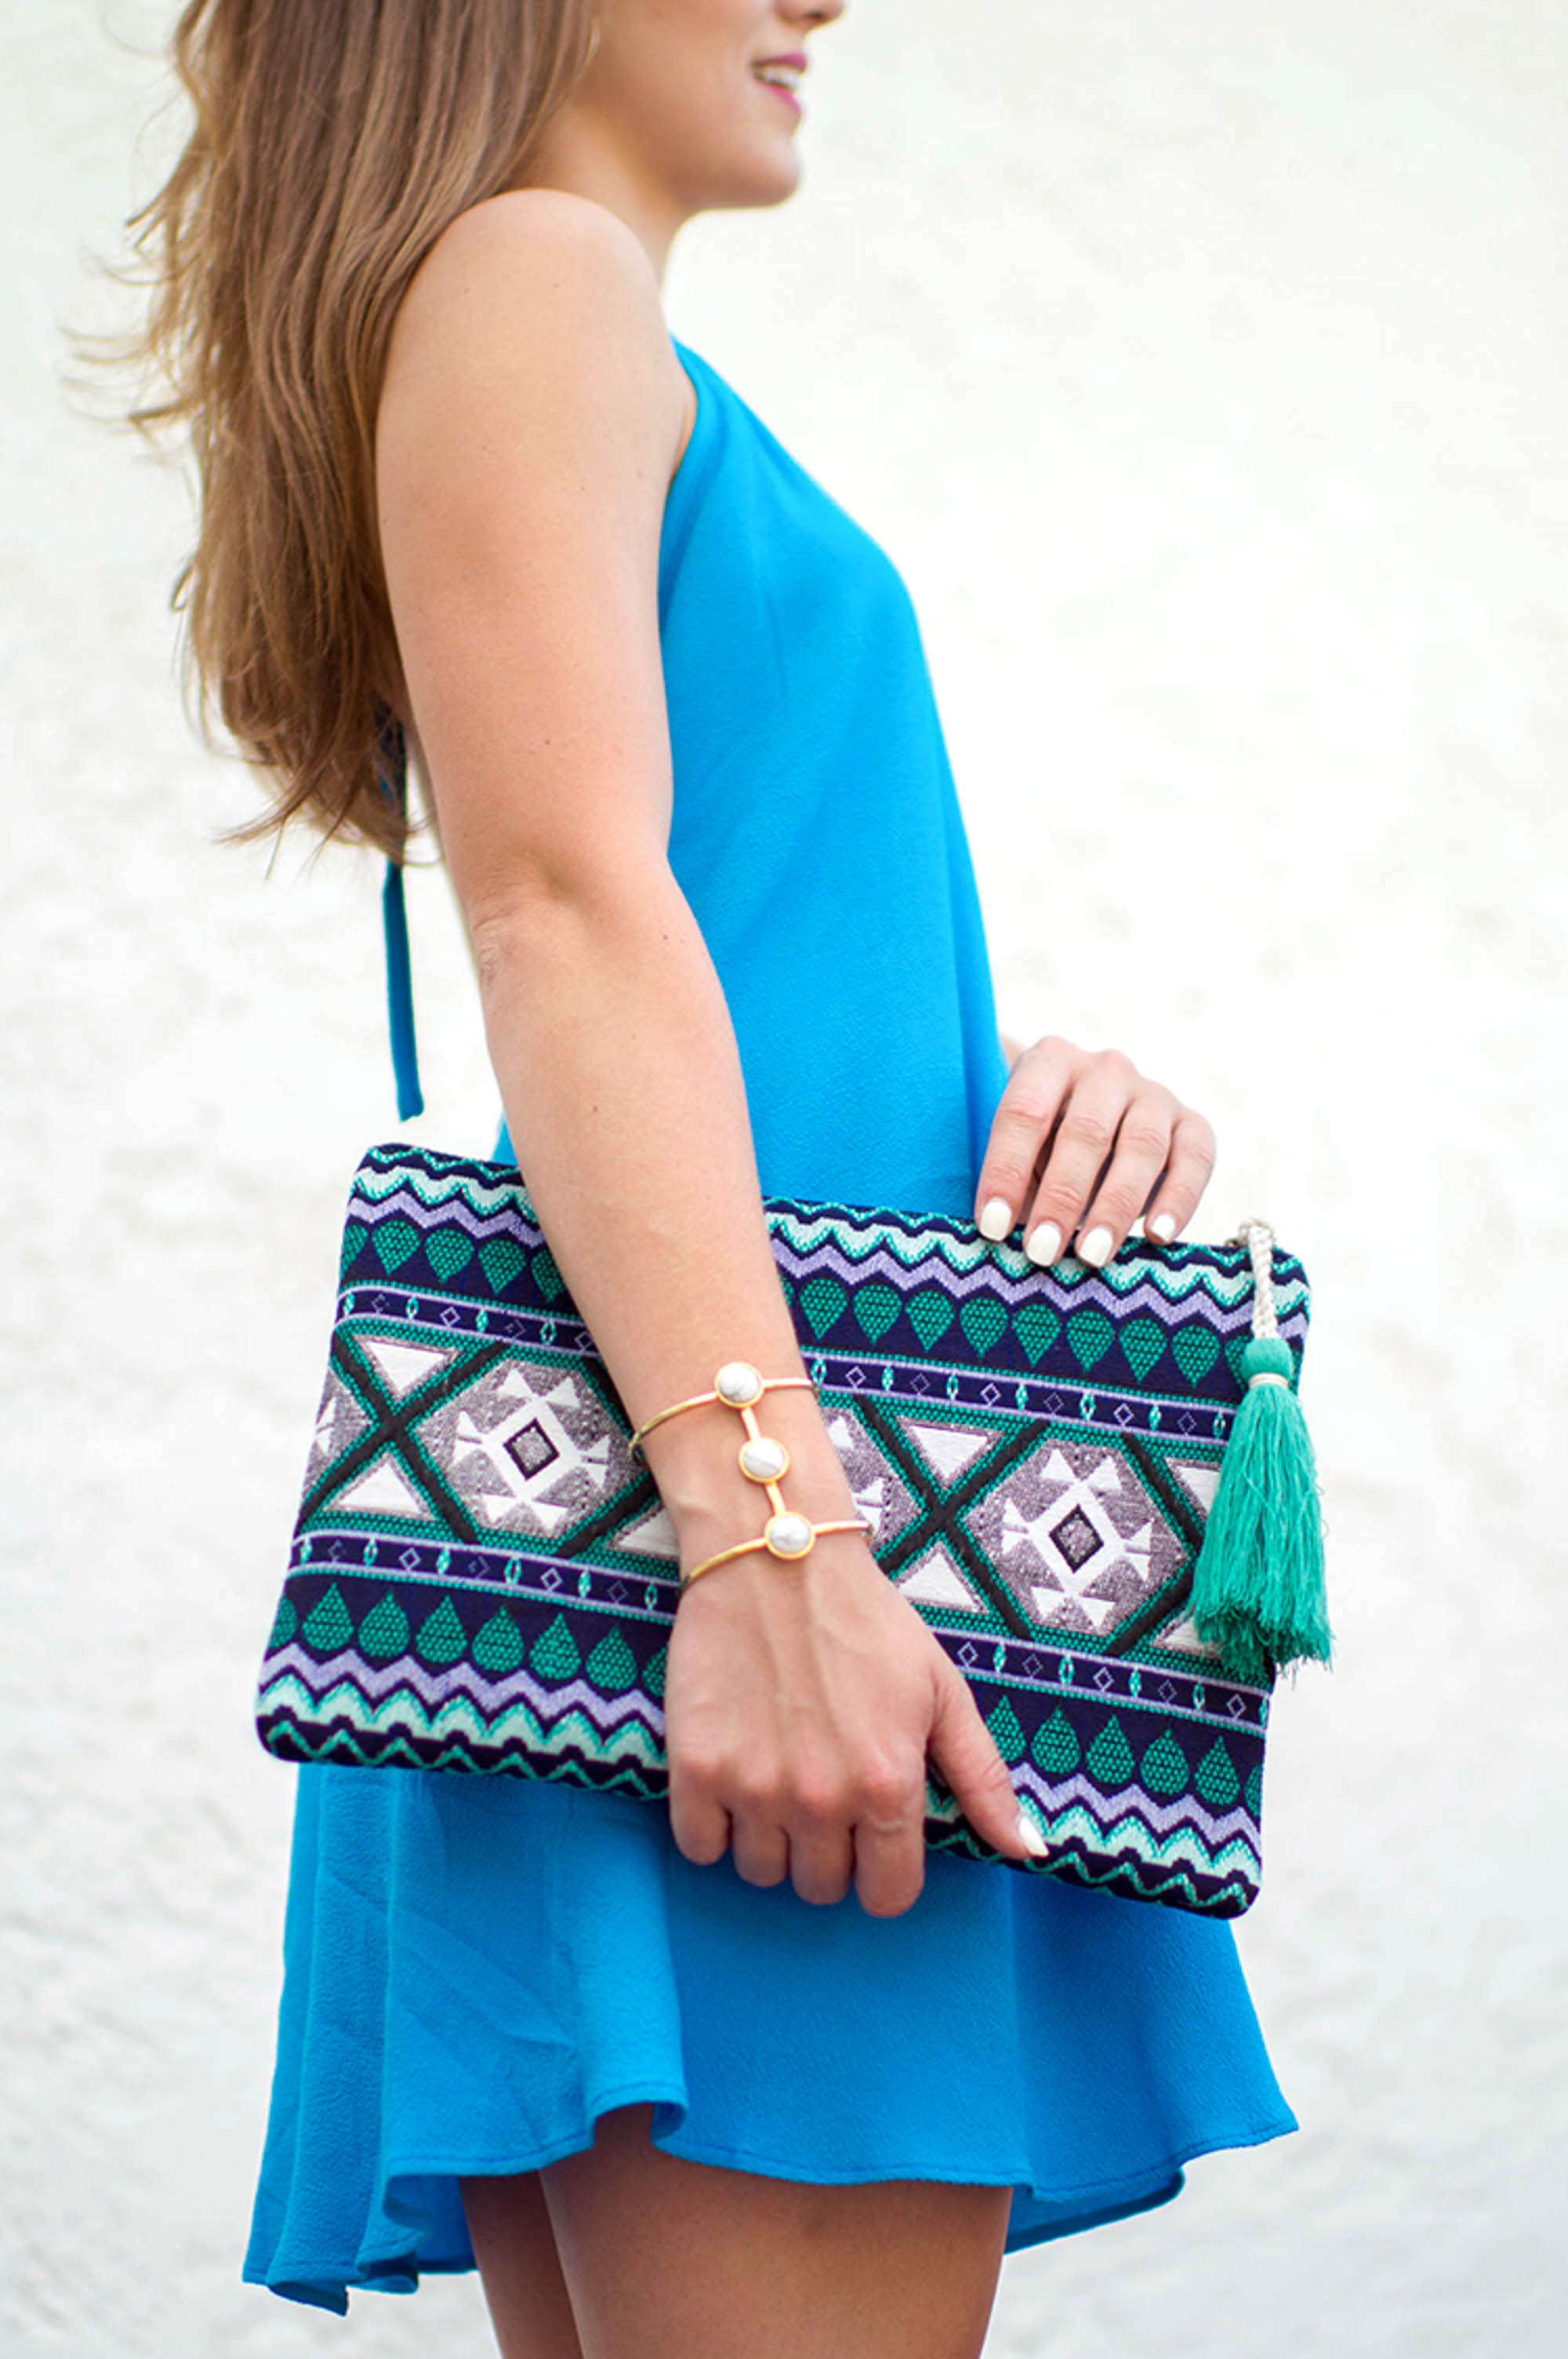 blue halter dress, sole society clutch, sole society wedges, sole society clutch